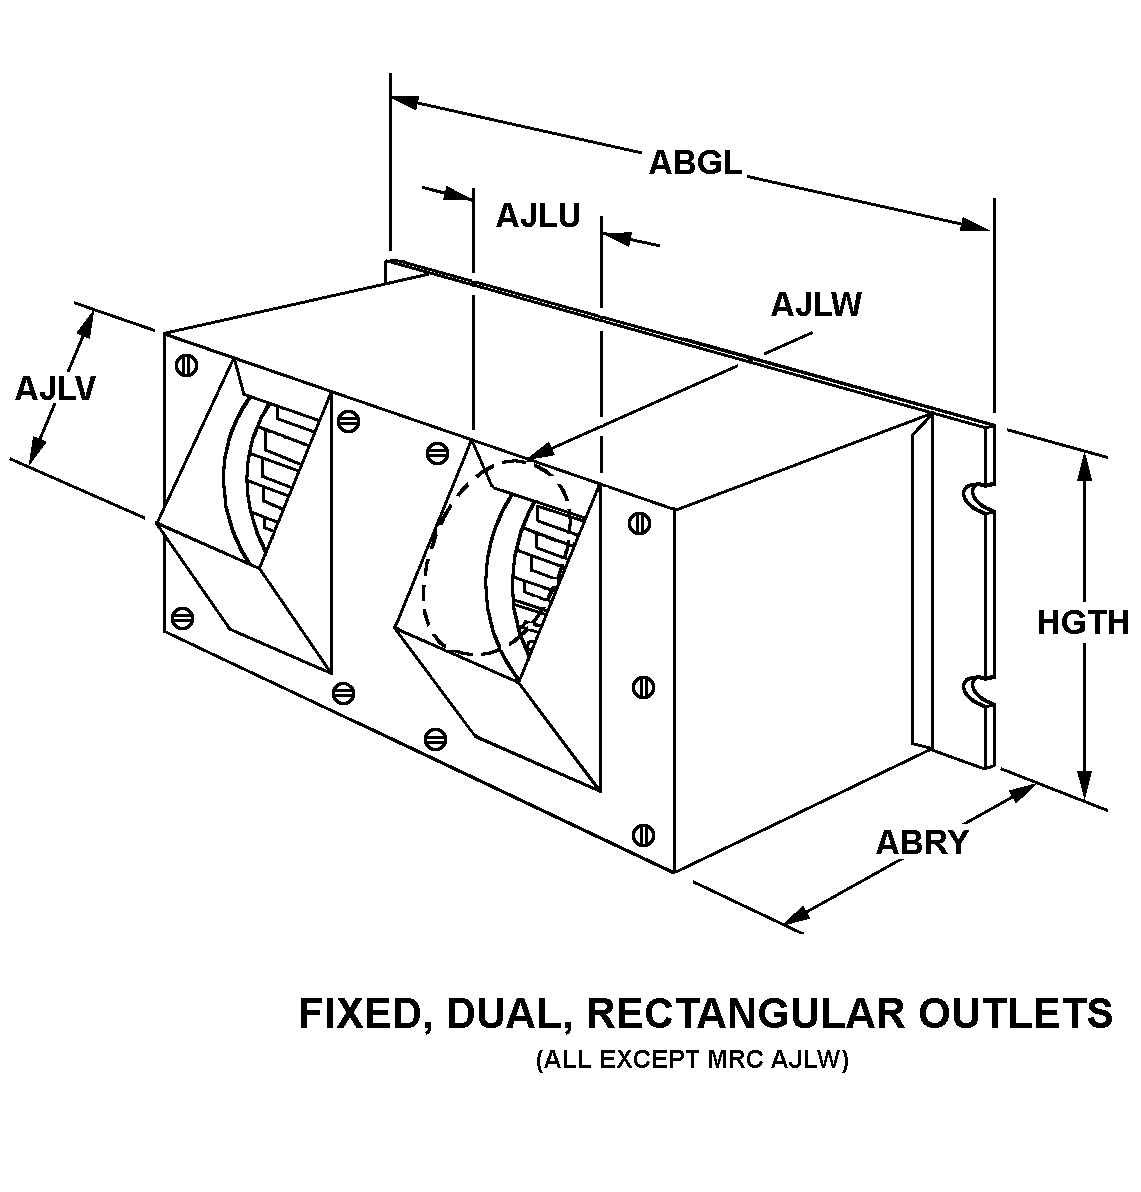 FIXED, DUAL, RECTANGULAR OUTLETS style nsn 4140-01-108-8987